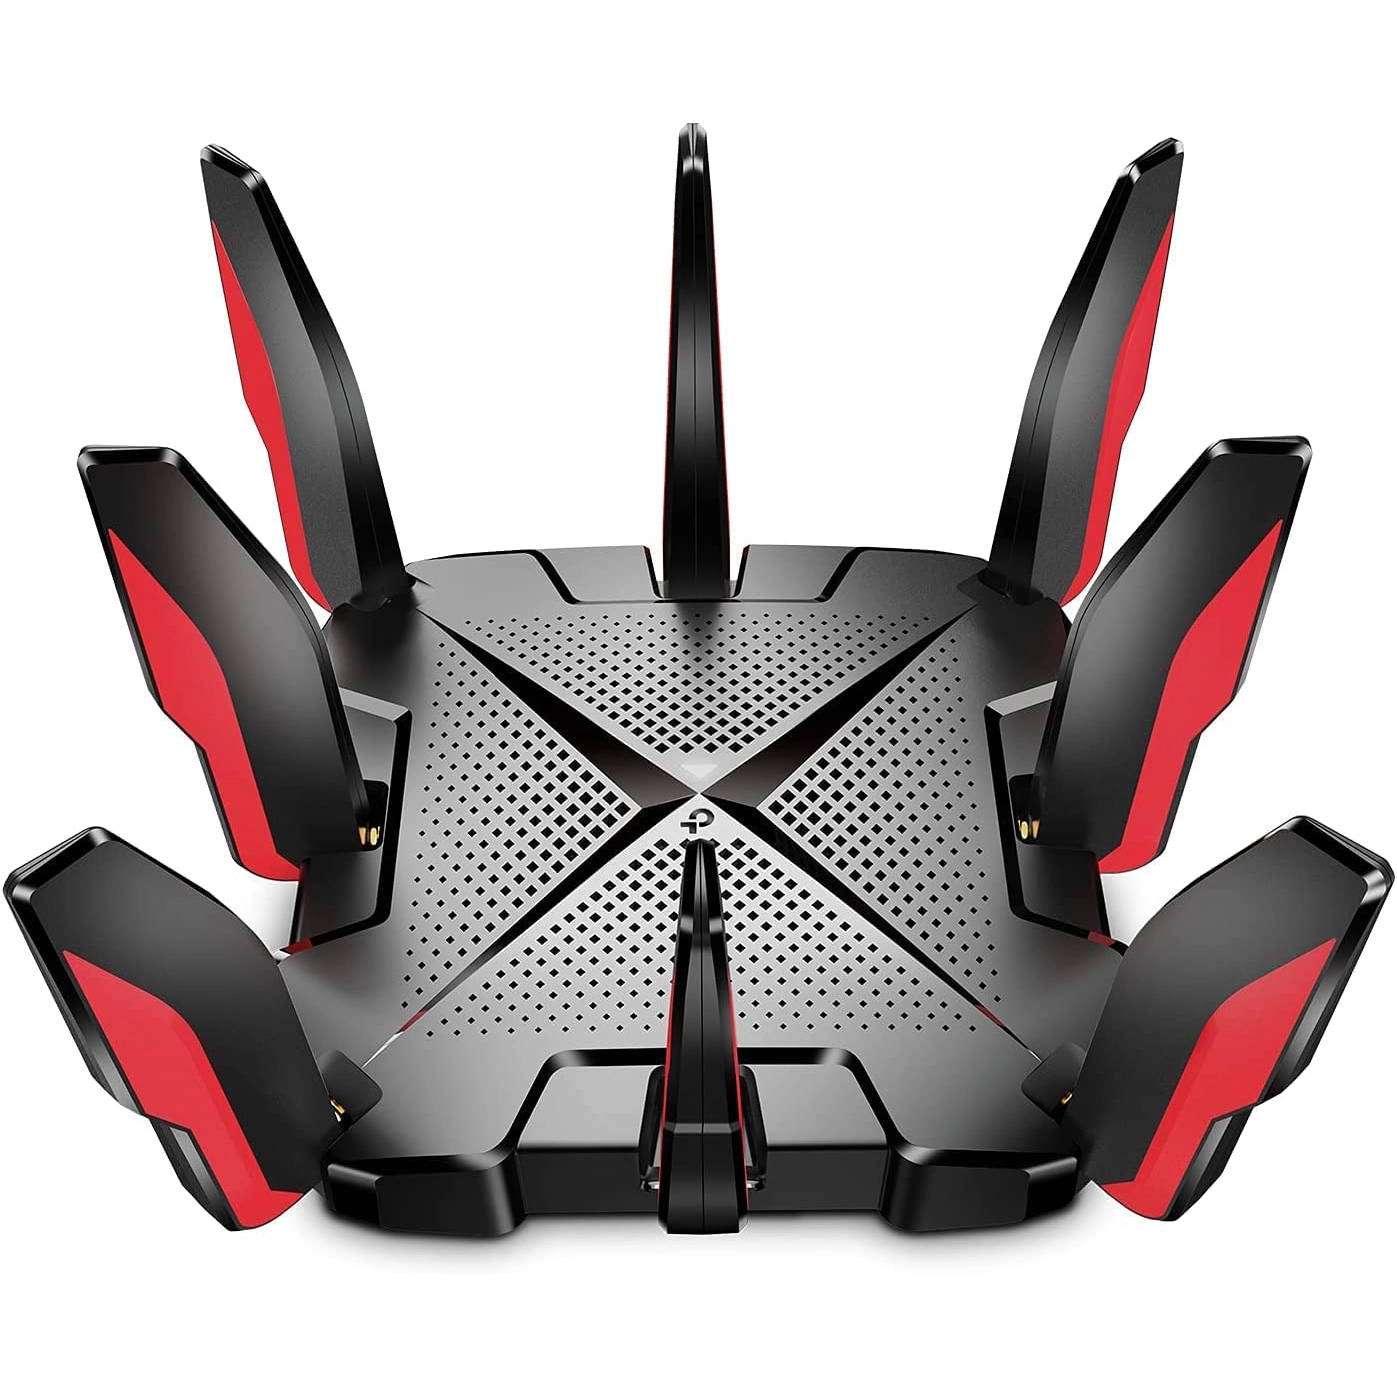 TP-LINK ARCHER GX90 AX6600 Tri-Band Wi-Fi 6 Gaming Router, 4804 Mbps, 2.5 Gbps LAN, 2*USB